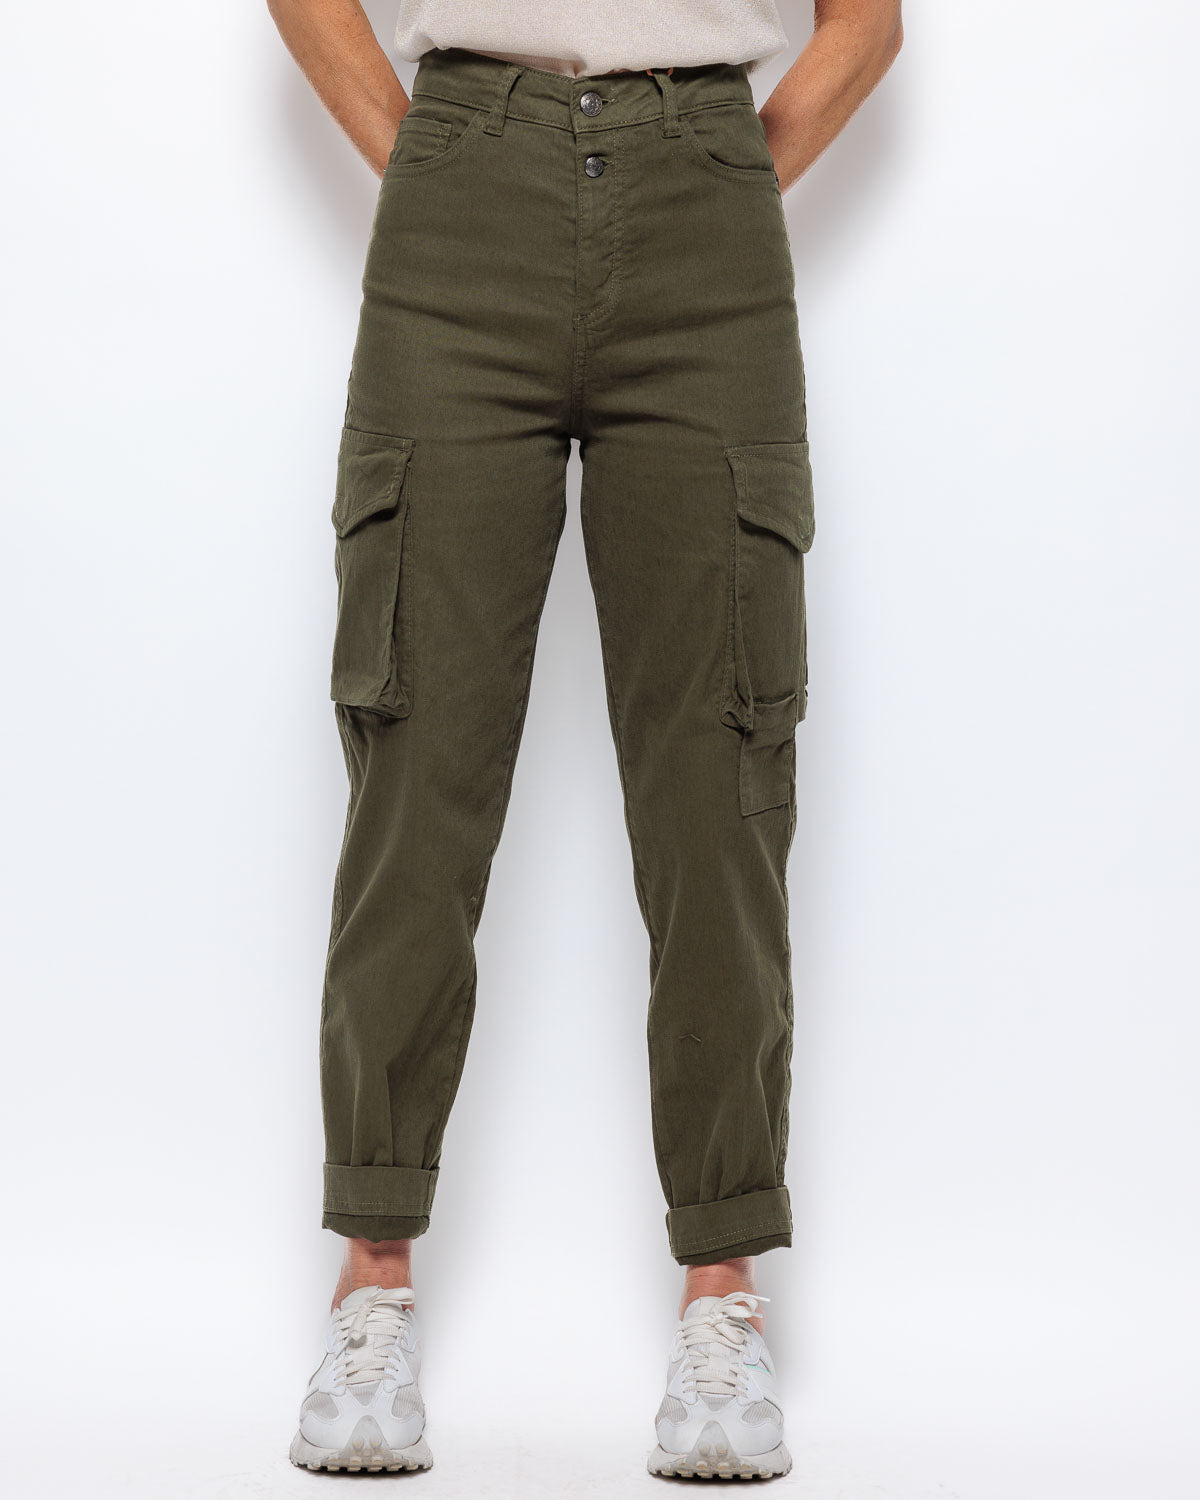 Mos Mosh Adeline Cargo Pants in Forest Night